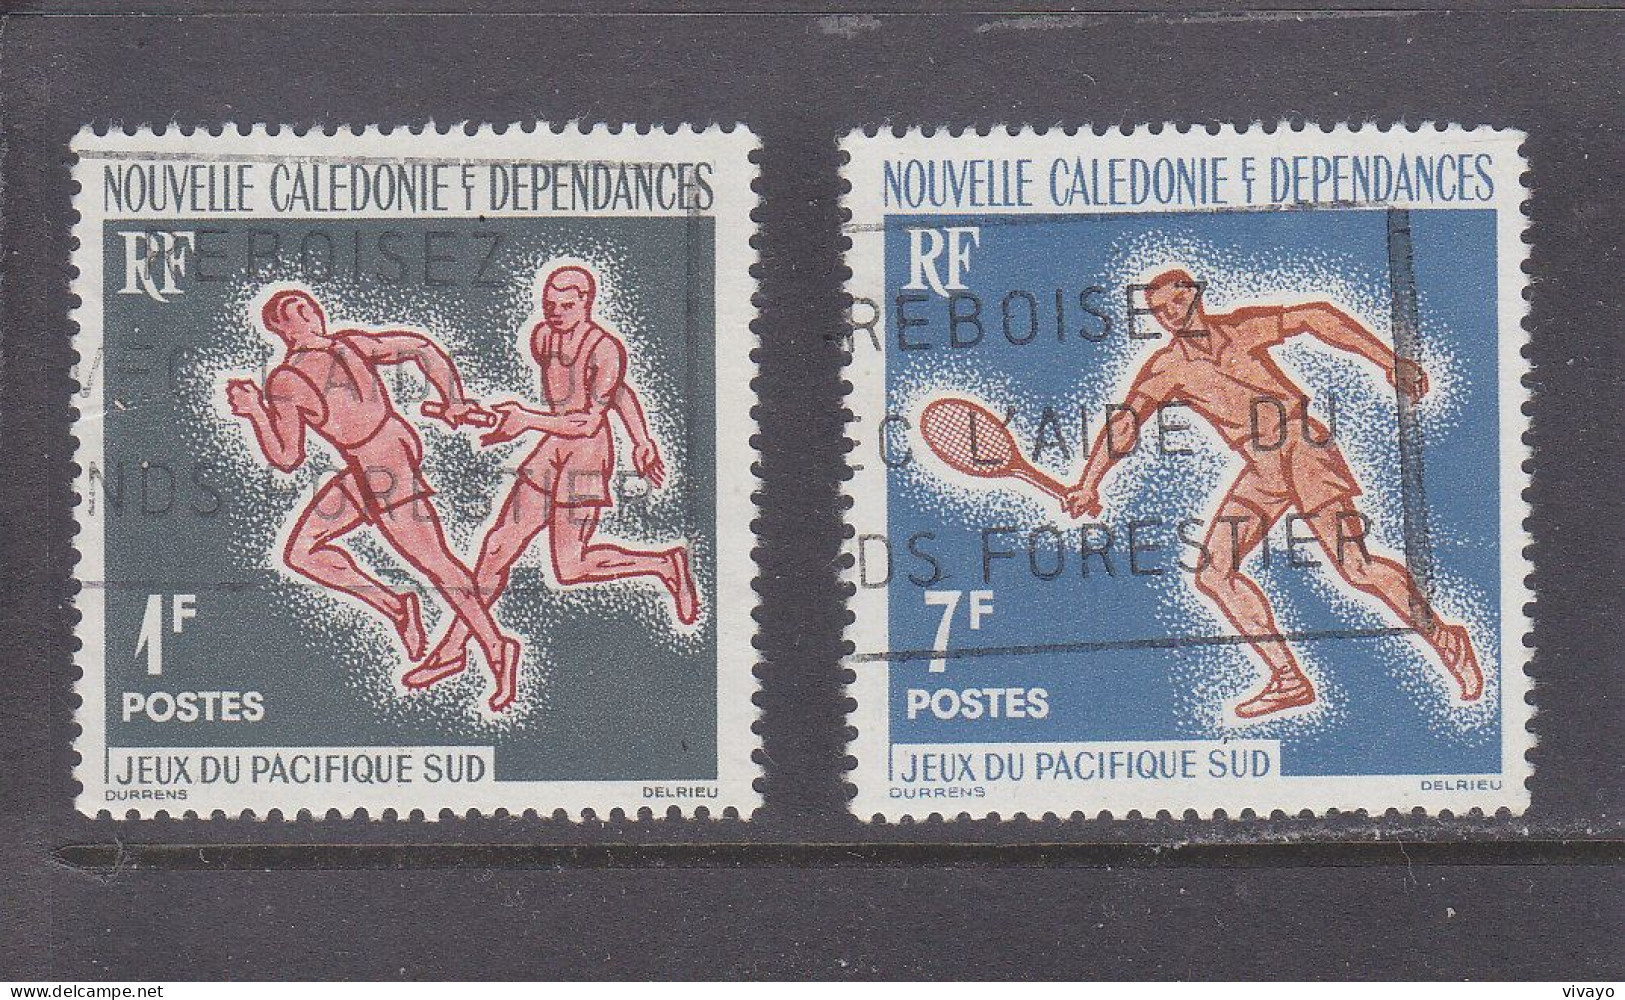 NOUVELLE CALEDONIE - O / FINE CANCELLED - 1963 - SOUTH PACIFIC GAMES -  Yv. 308/9  -   Mi. 388/9 - Used Stamps